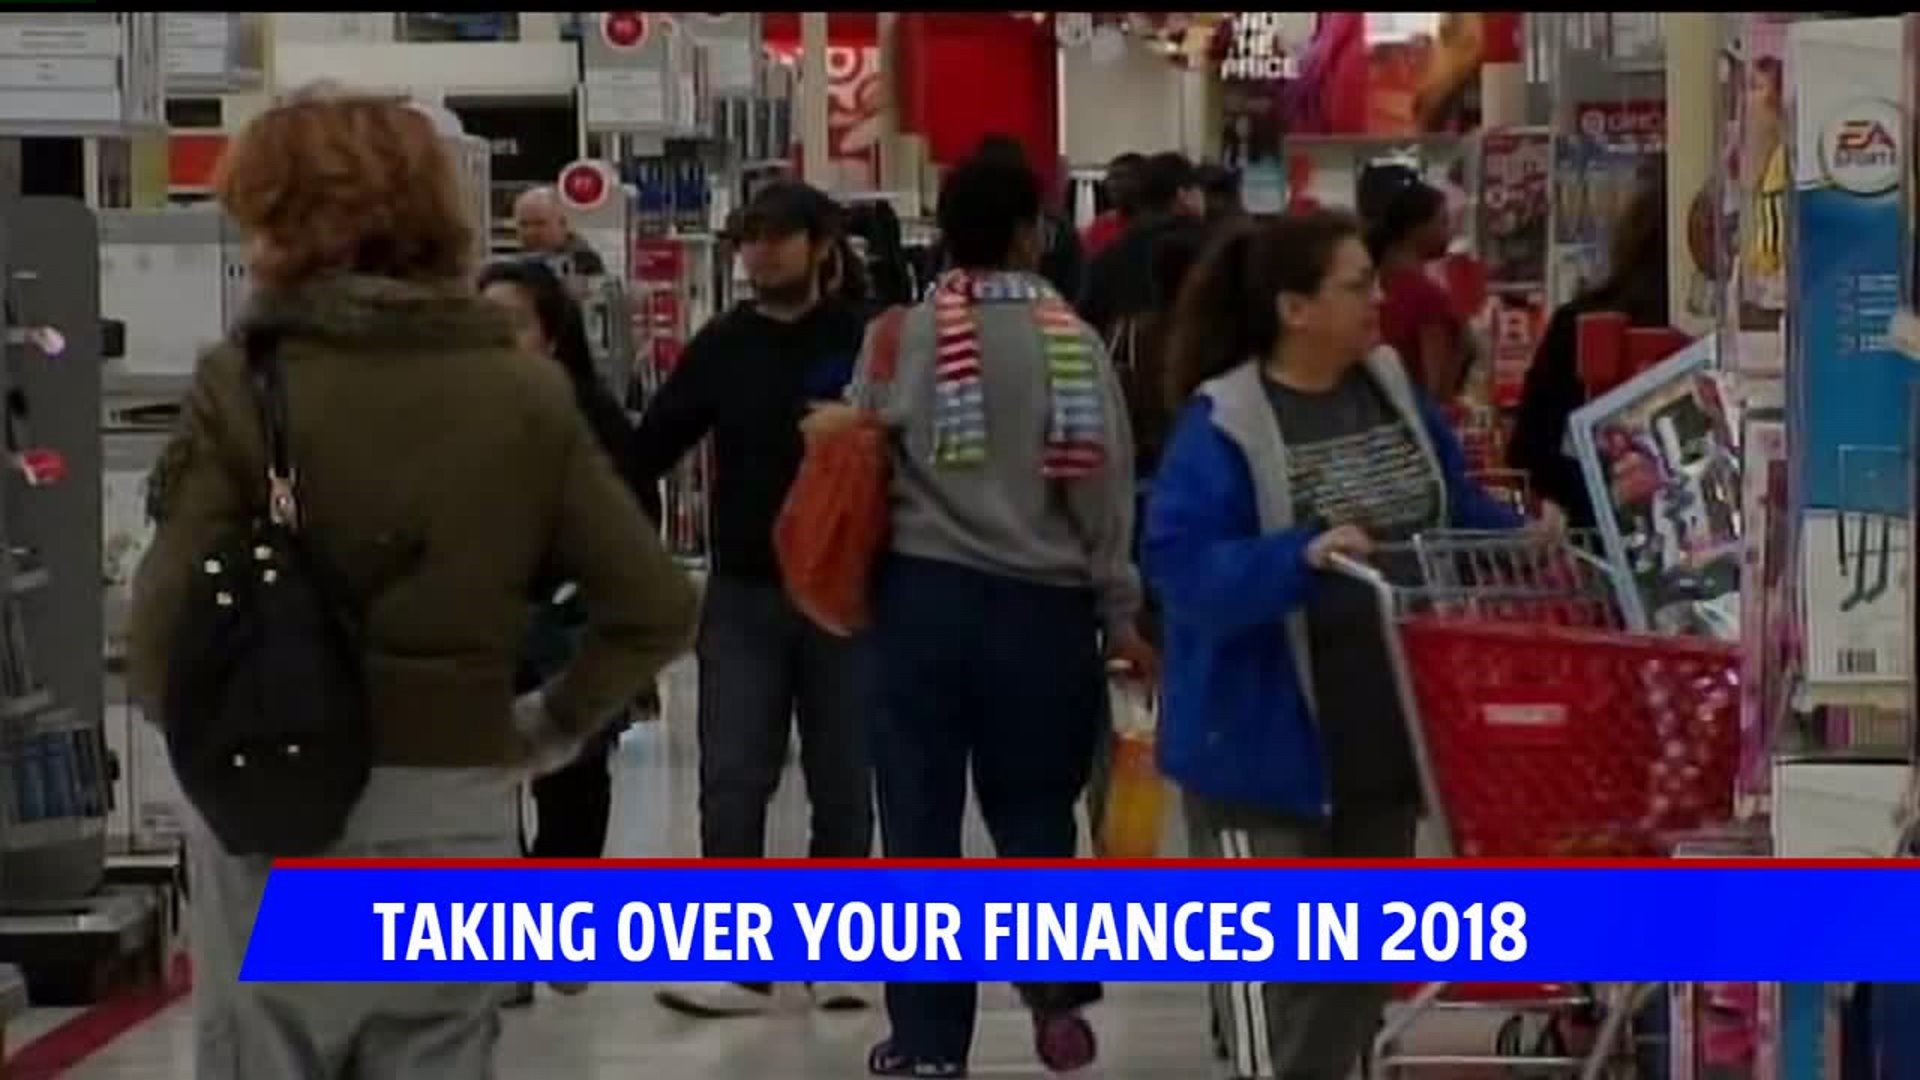 Take control of your finances in 2018